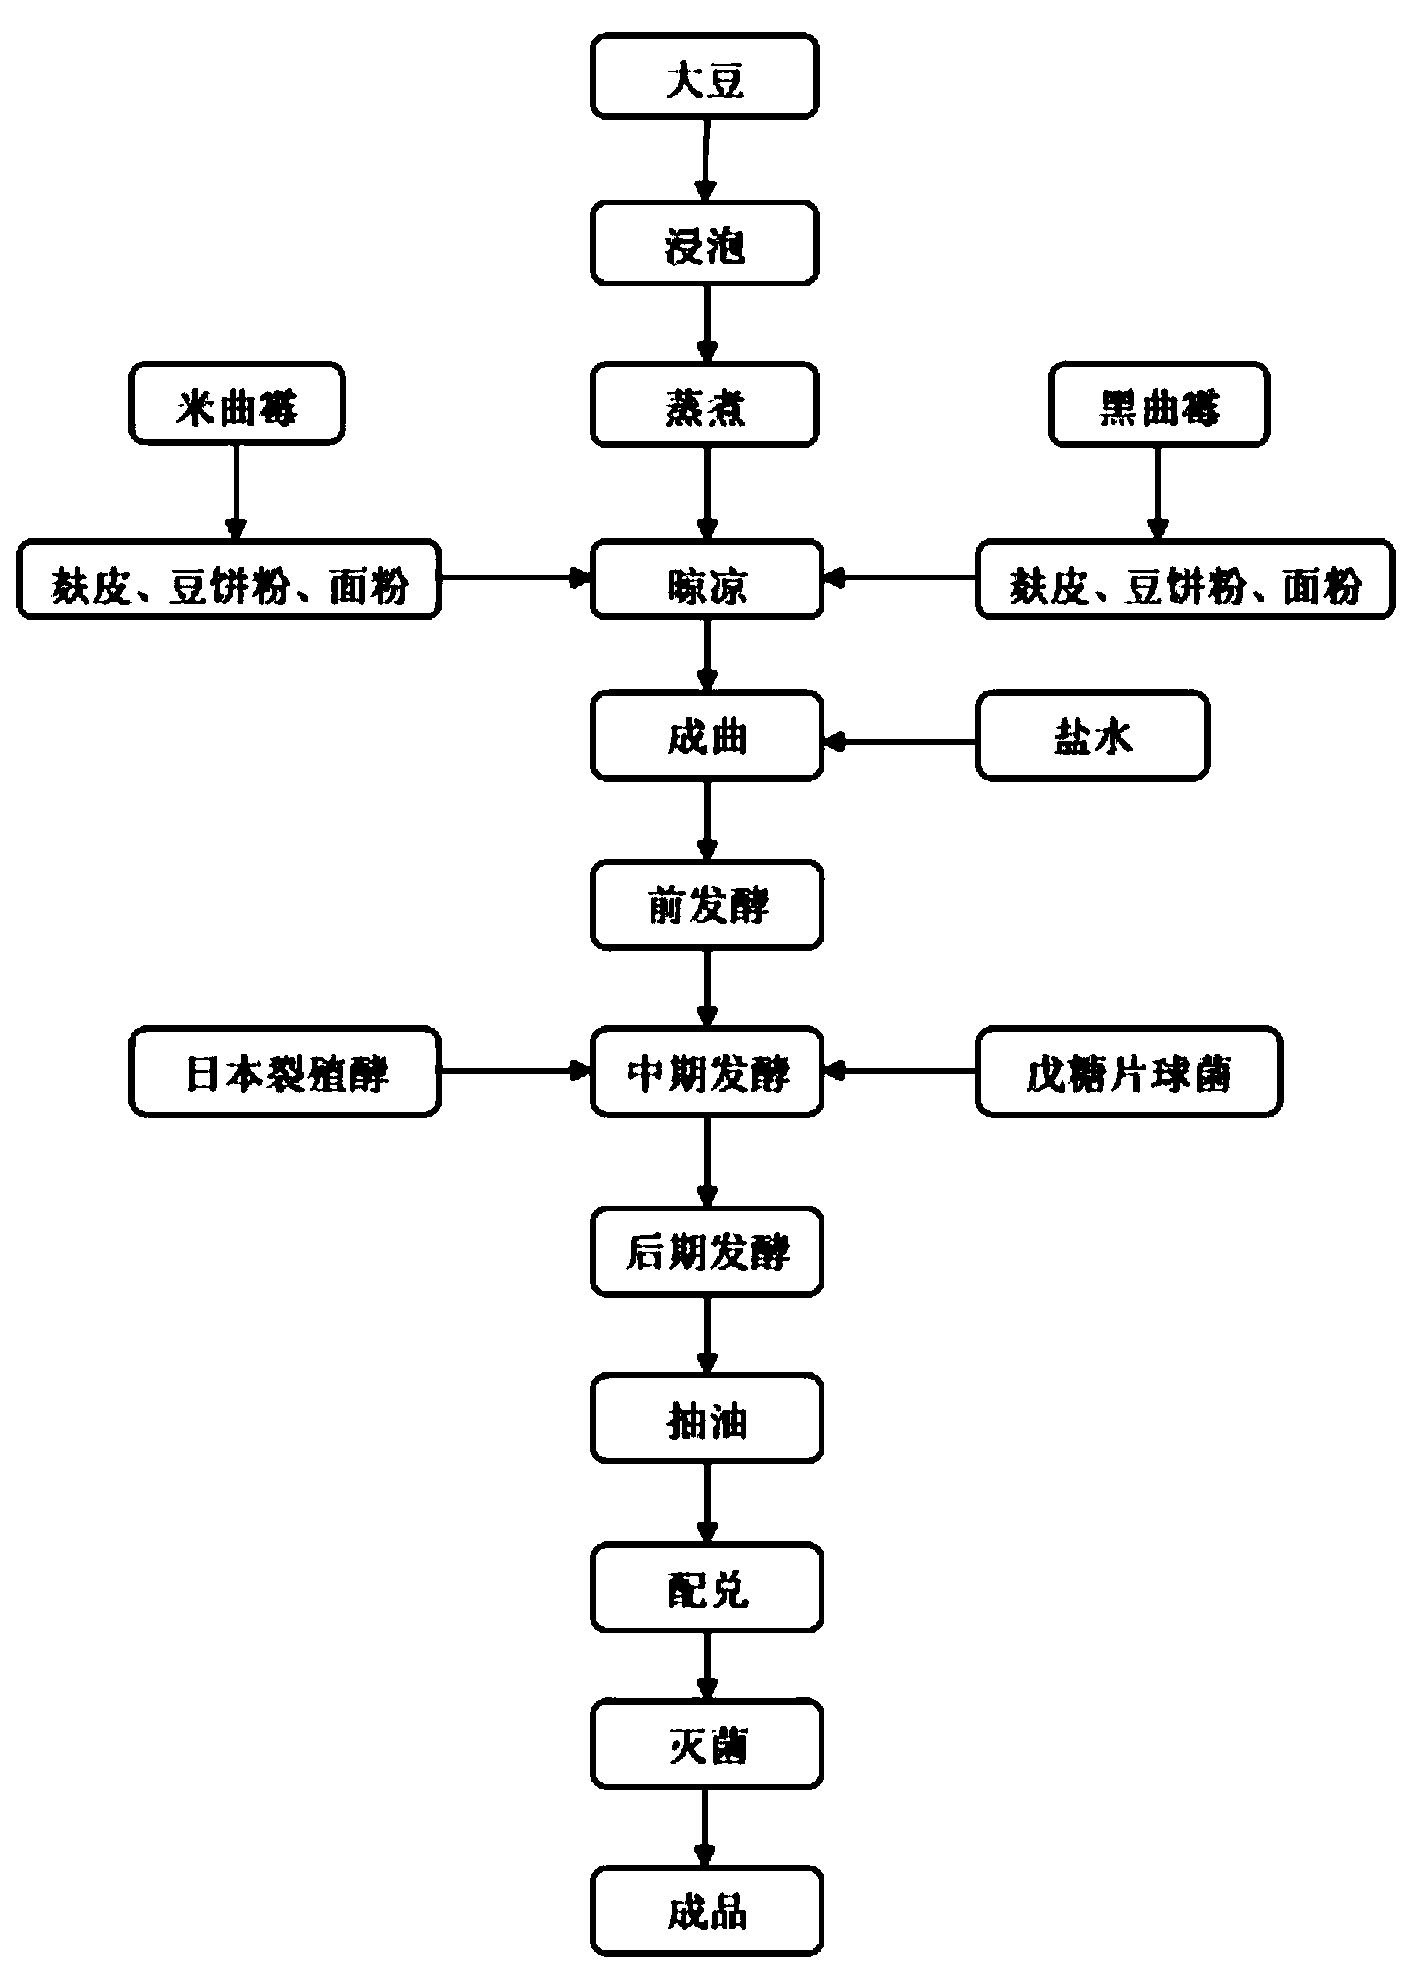 Method for producing high-salt diluted soybean sauce through cooperative fermentation of multiple strains